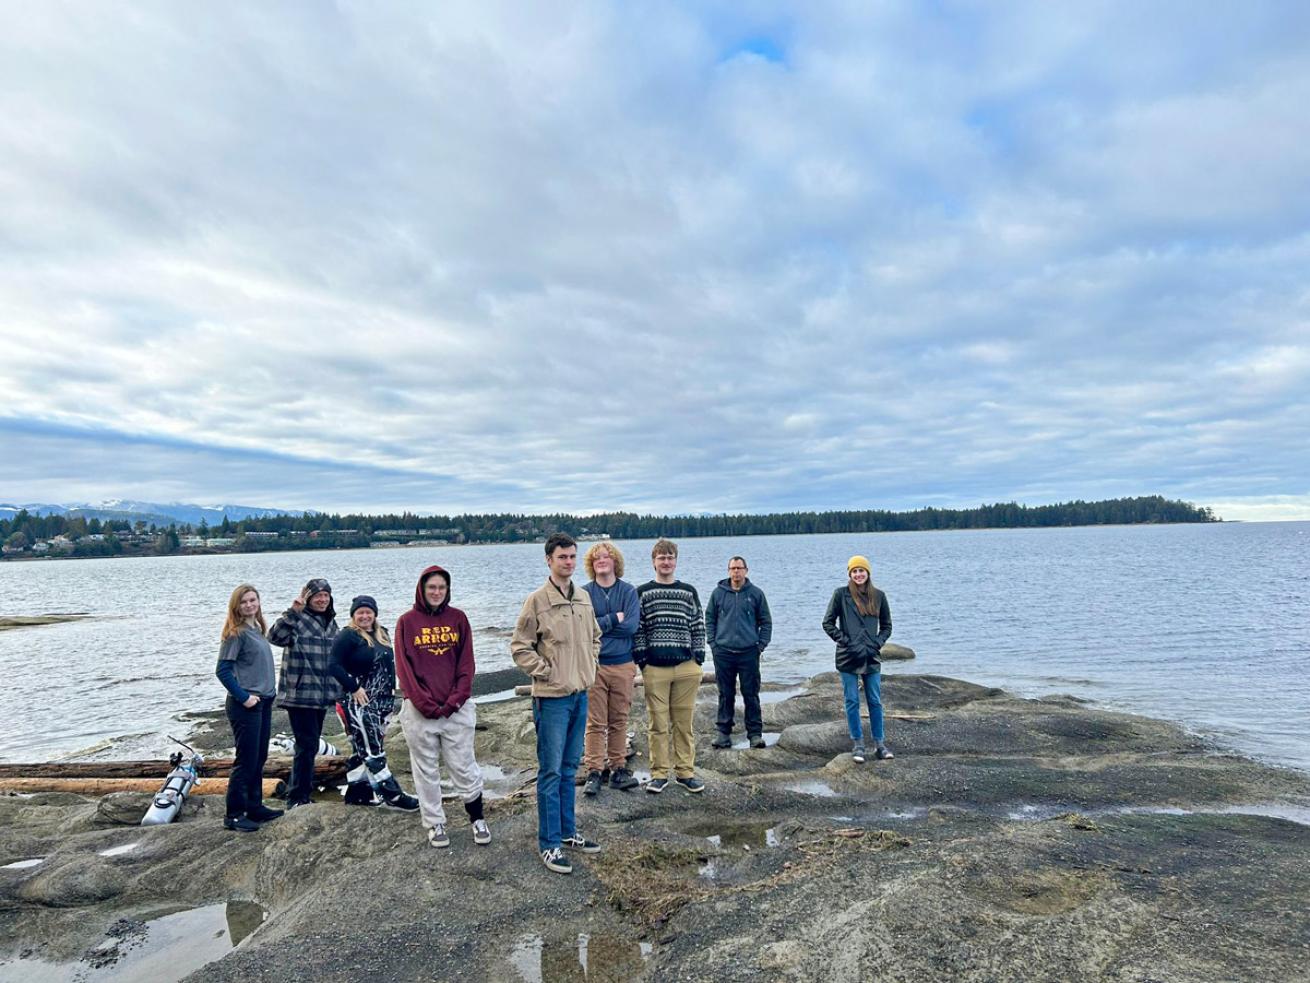 A group of Into the Ocean Society divers at Madrona Point in Nanoose, British Columbia. ITO helps local youths become certified divers as well as stewards of the sport and the marine environment.